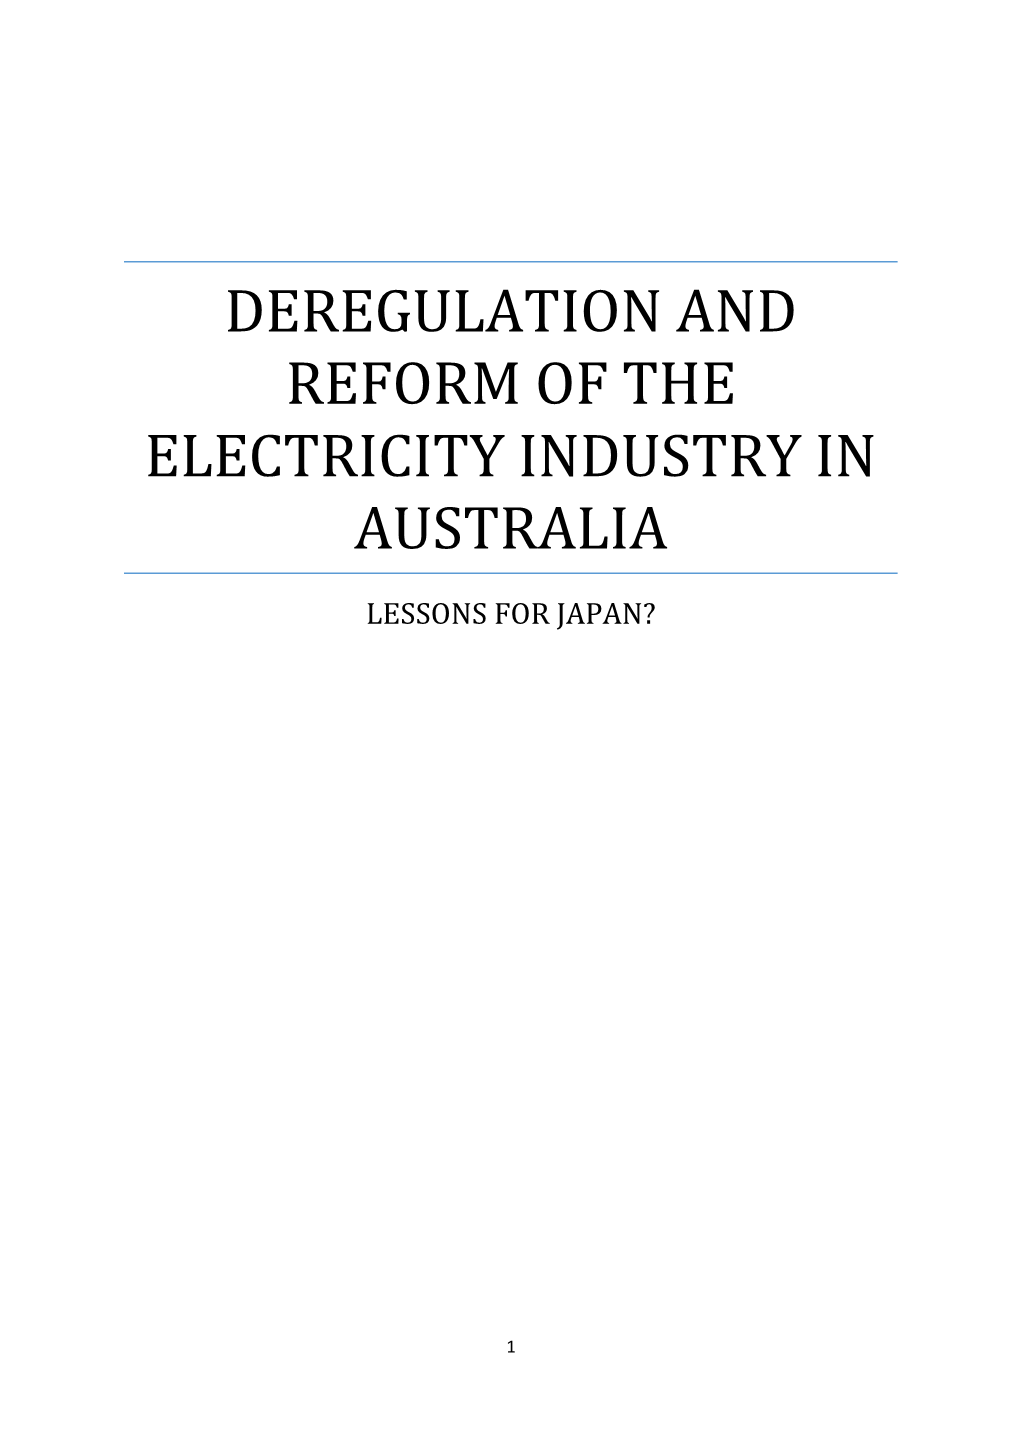 Deregulation and Reform of the Electricity Industry in Australia